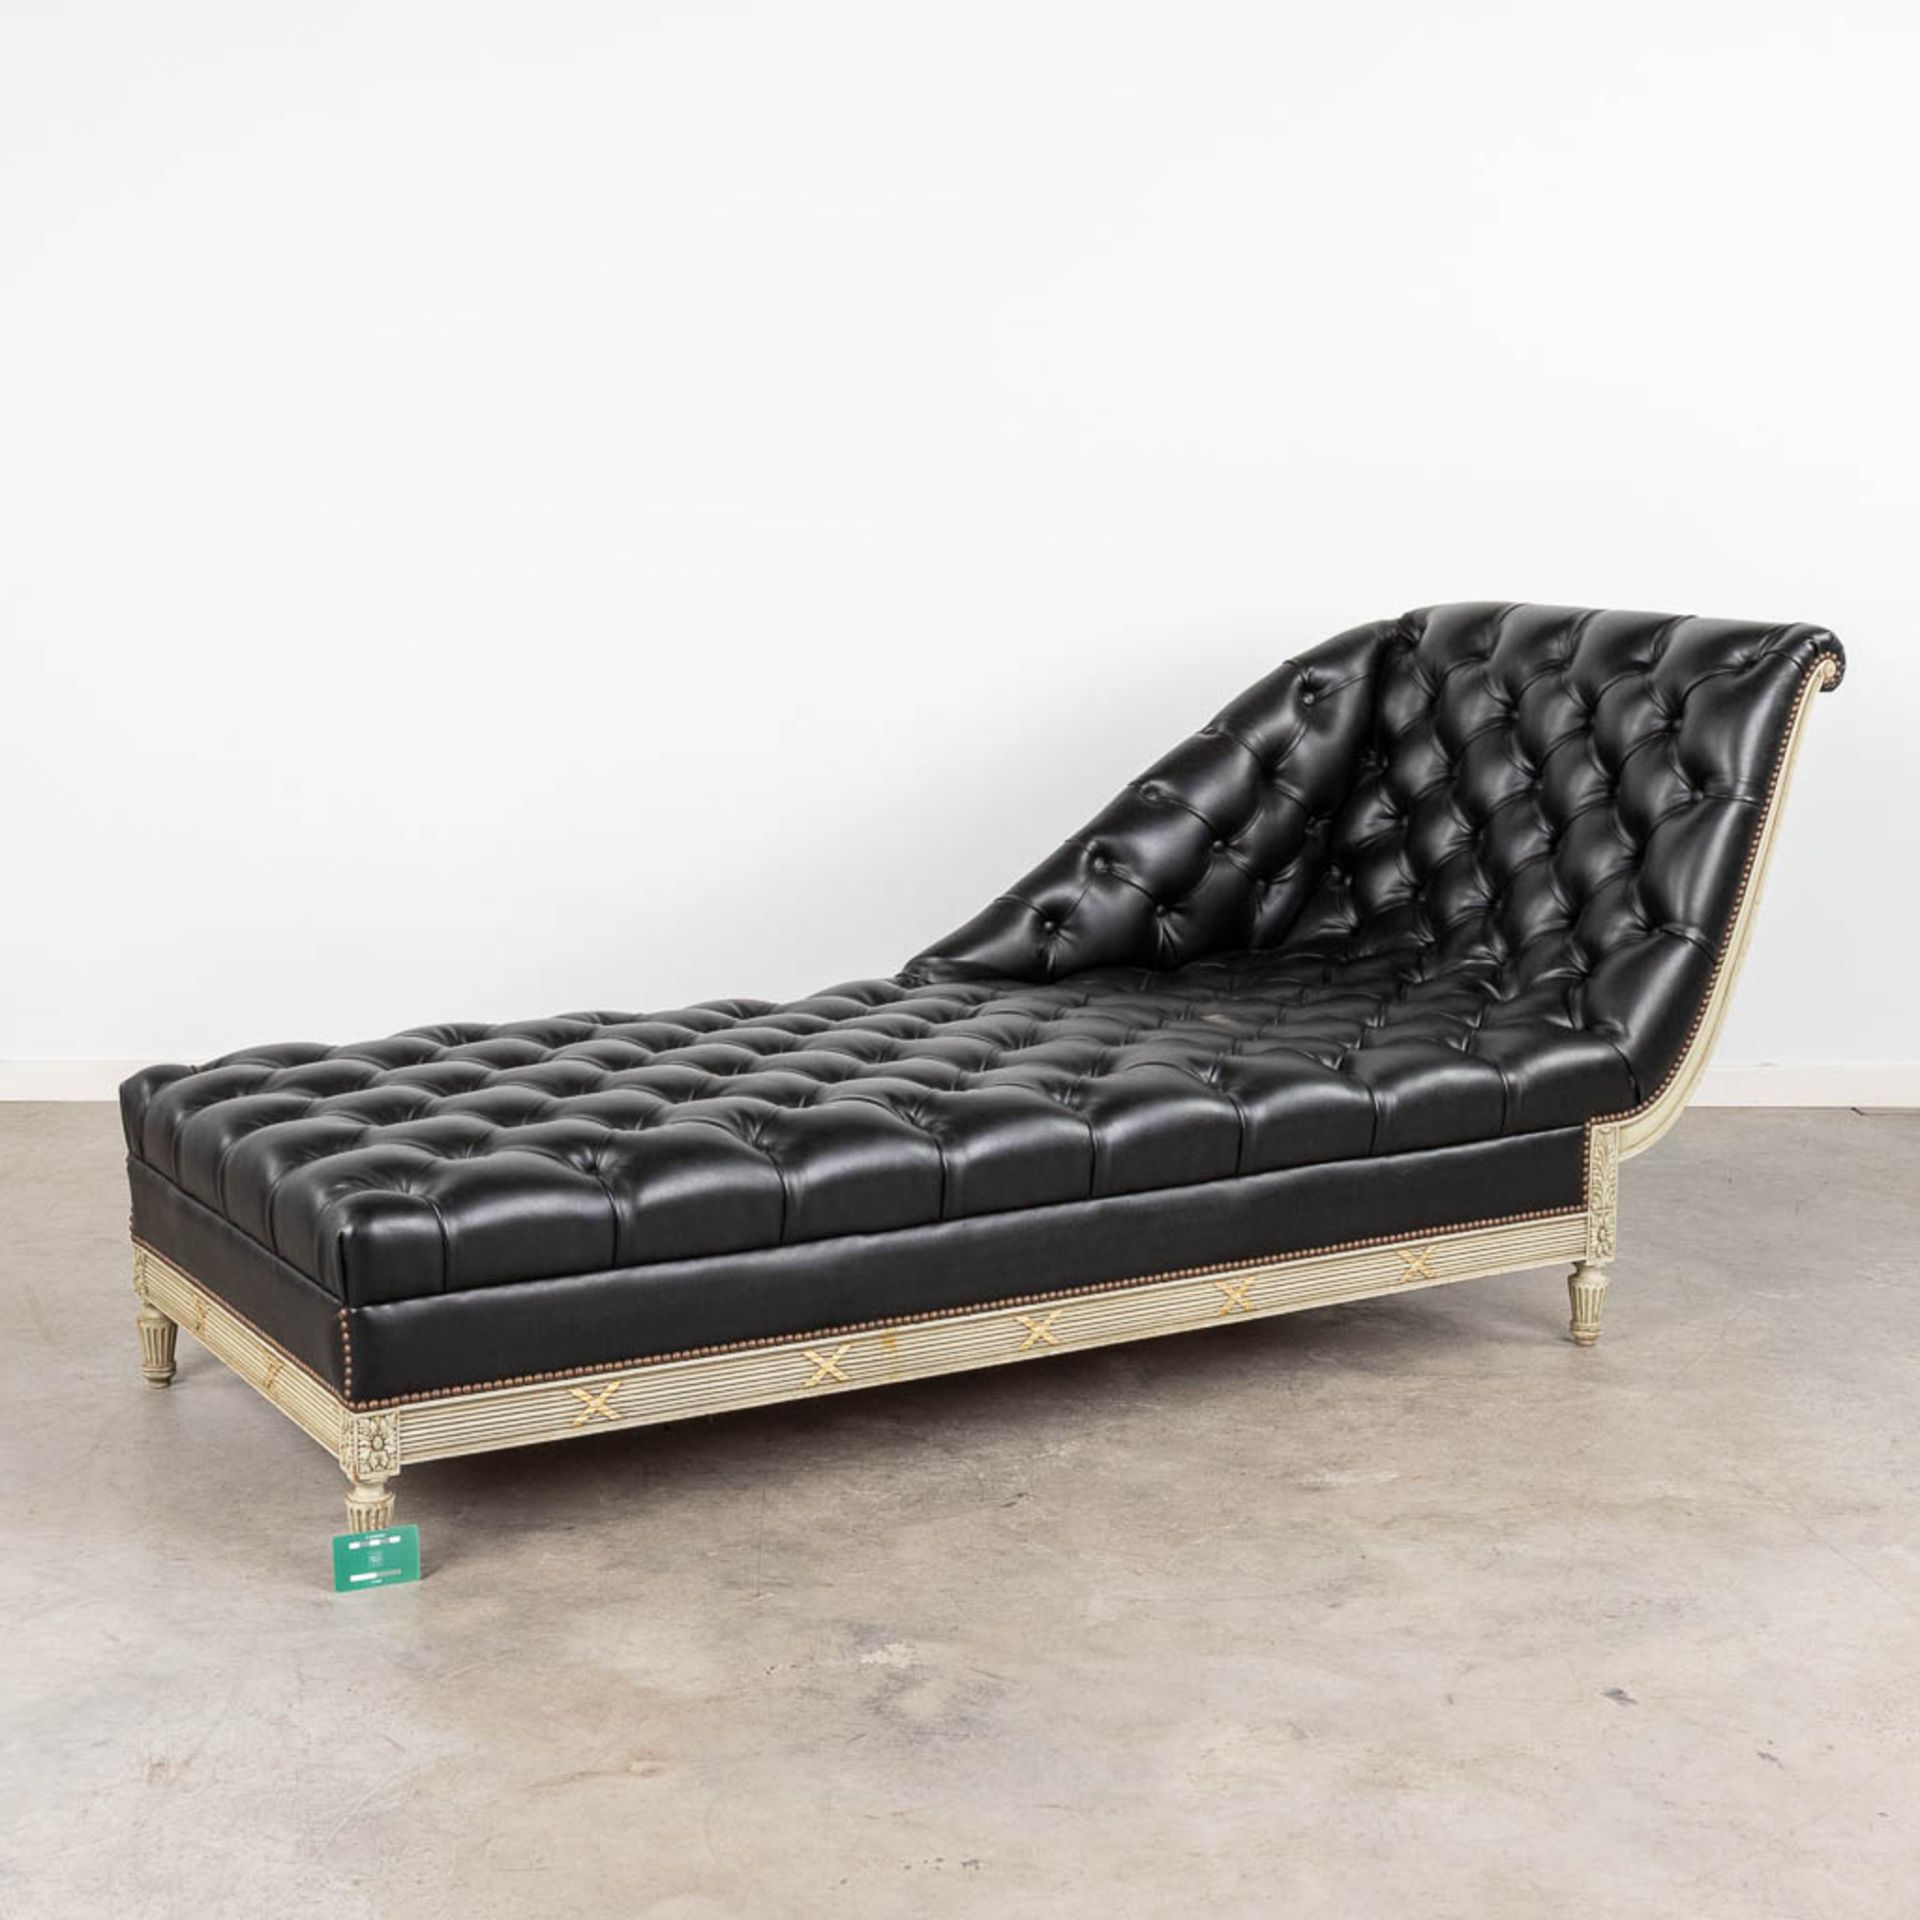 A white-patinated 'Chaise Longue', wood and leather in Louis XVI style. (L:76 x W:200 x H:87 cm) - Bild 2 aus 12